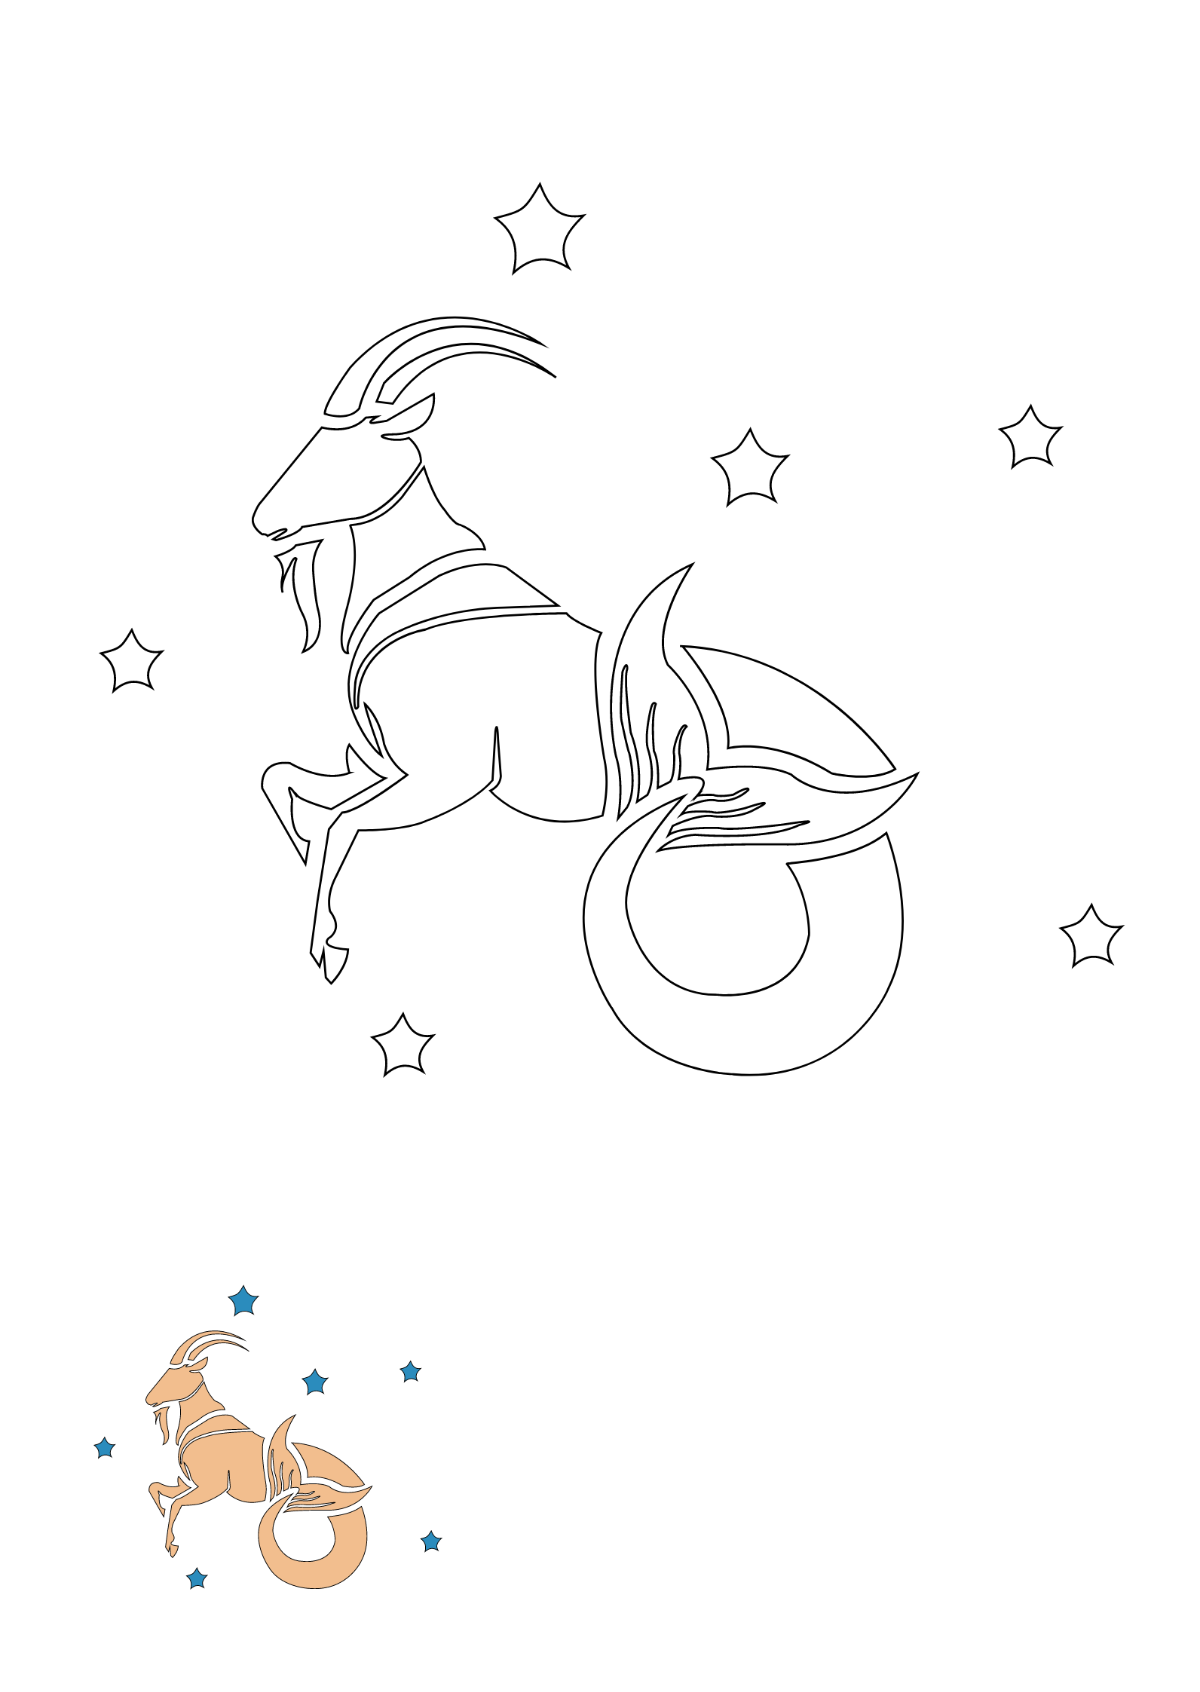 FREE Capricorn Coloring Page Templates & Examples - Edit Online ...